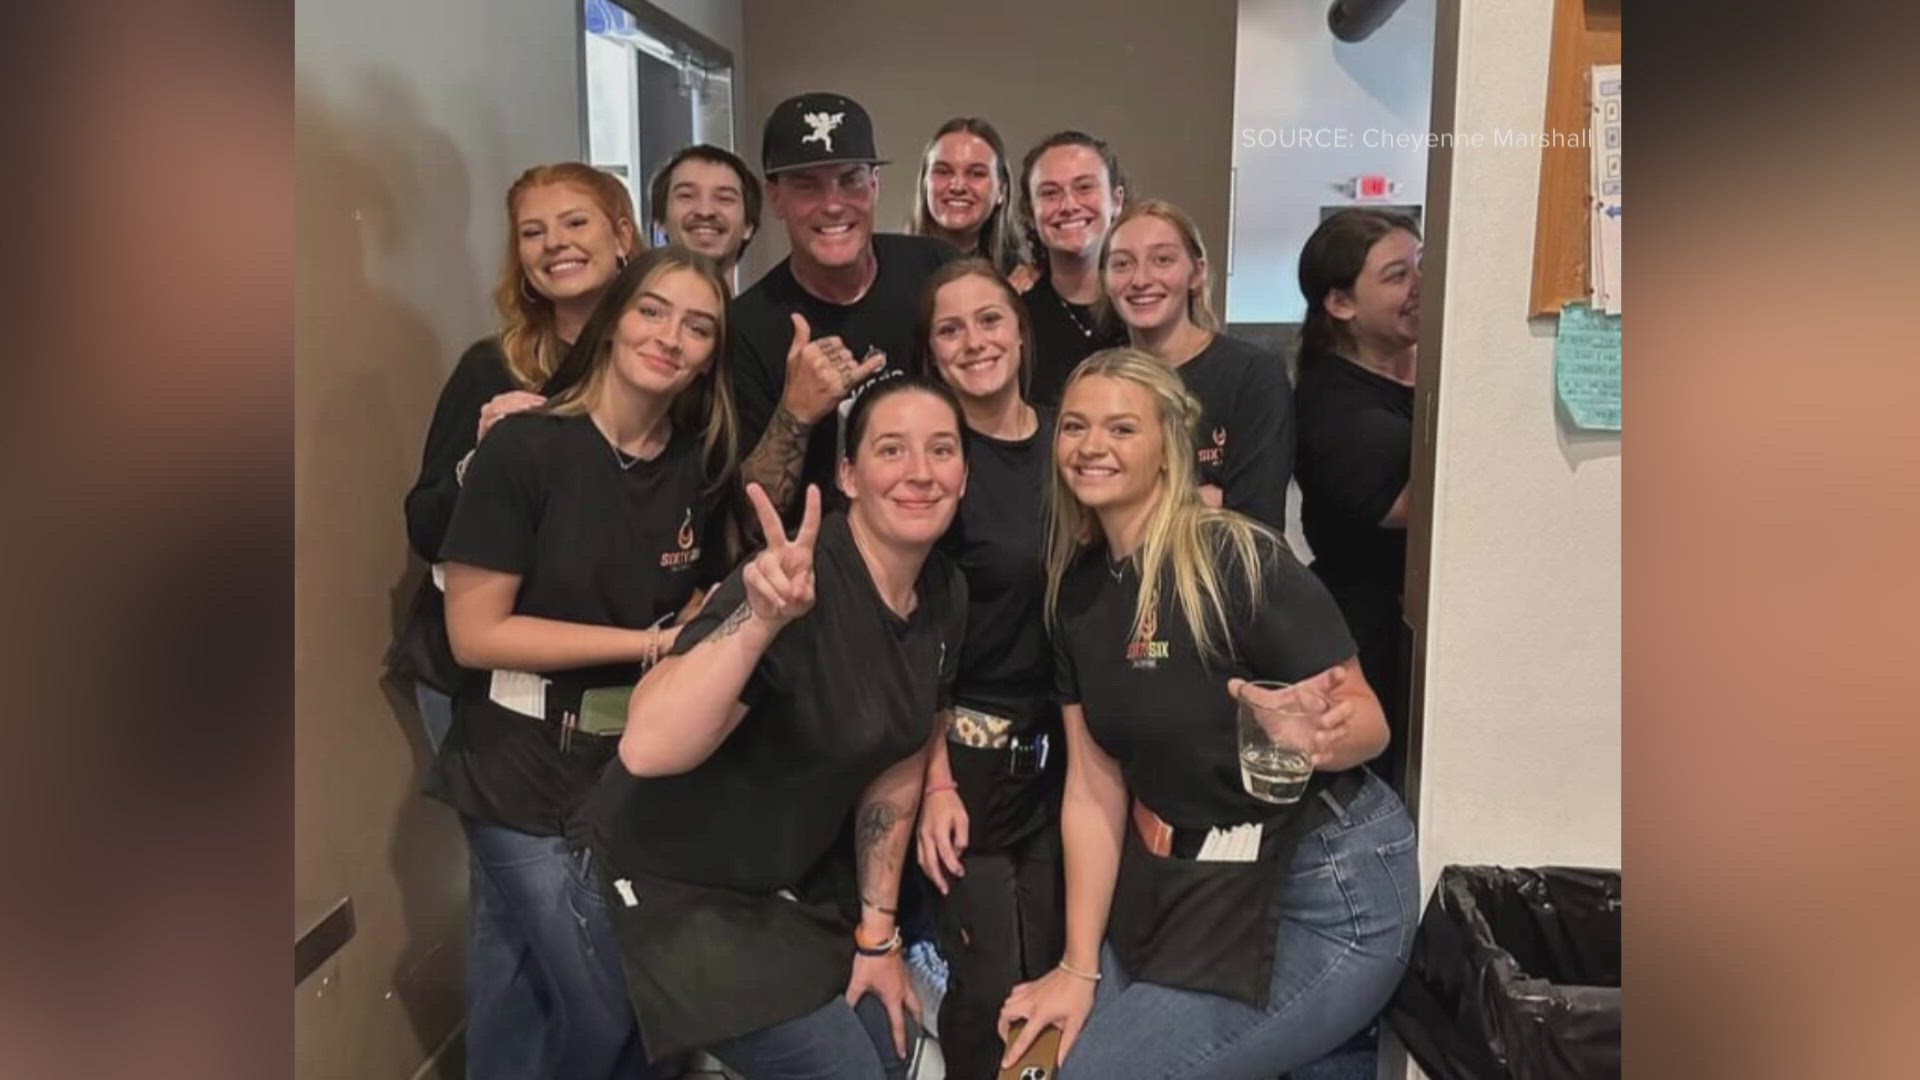 The 'Ice Ice Baby' rapper made a stop at Sixty Six restaurant in Thomasville before performing a concert in Alton, Virginia on Thursday.